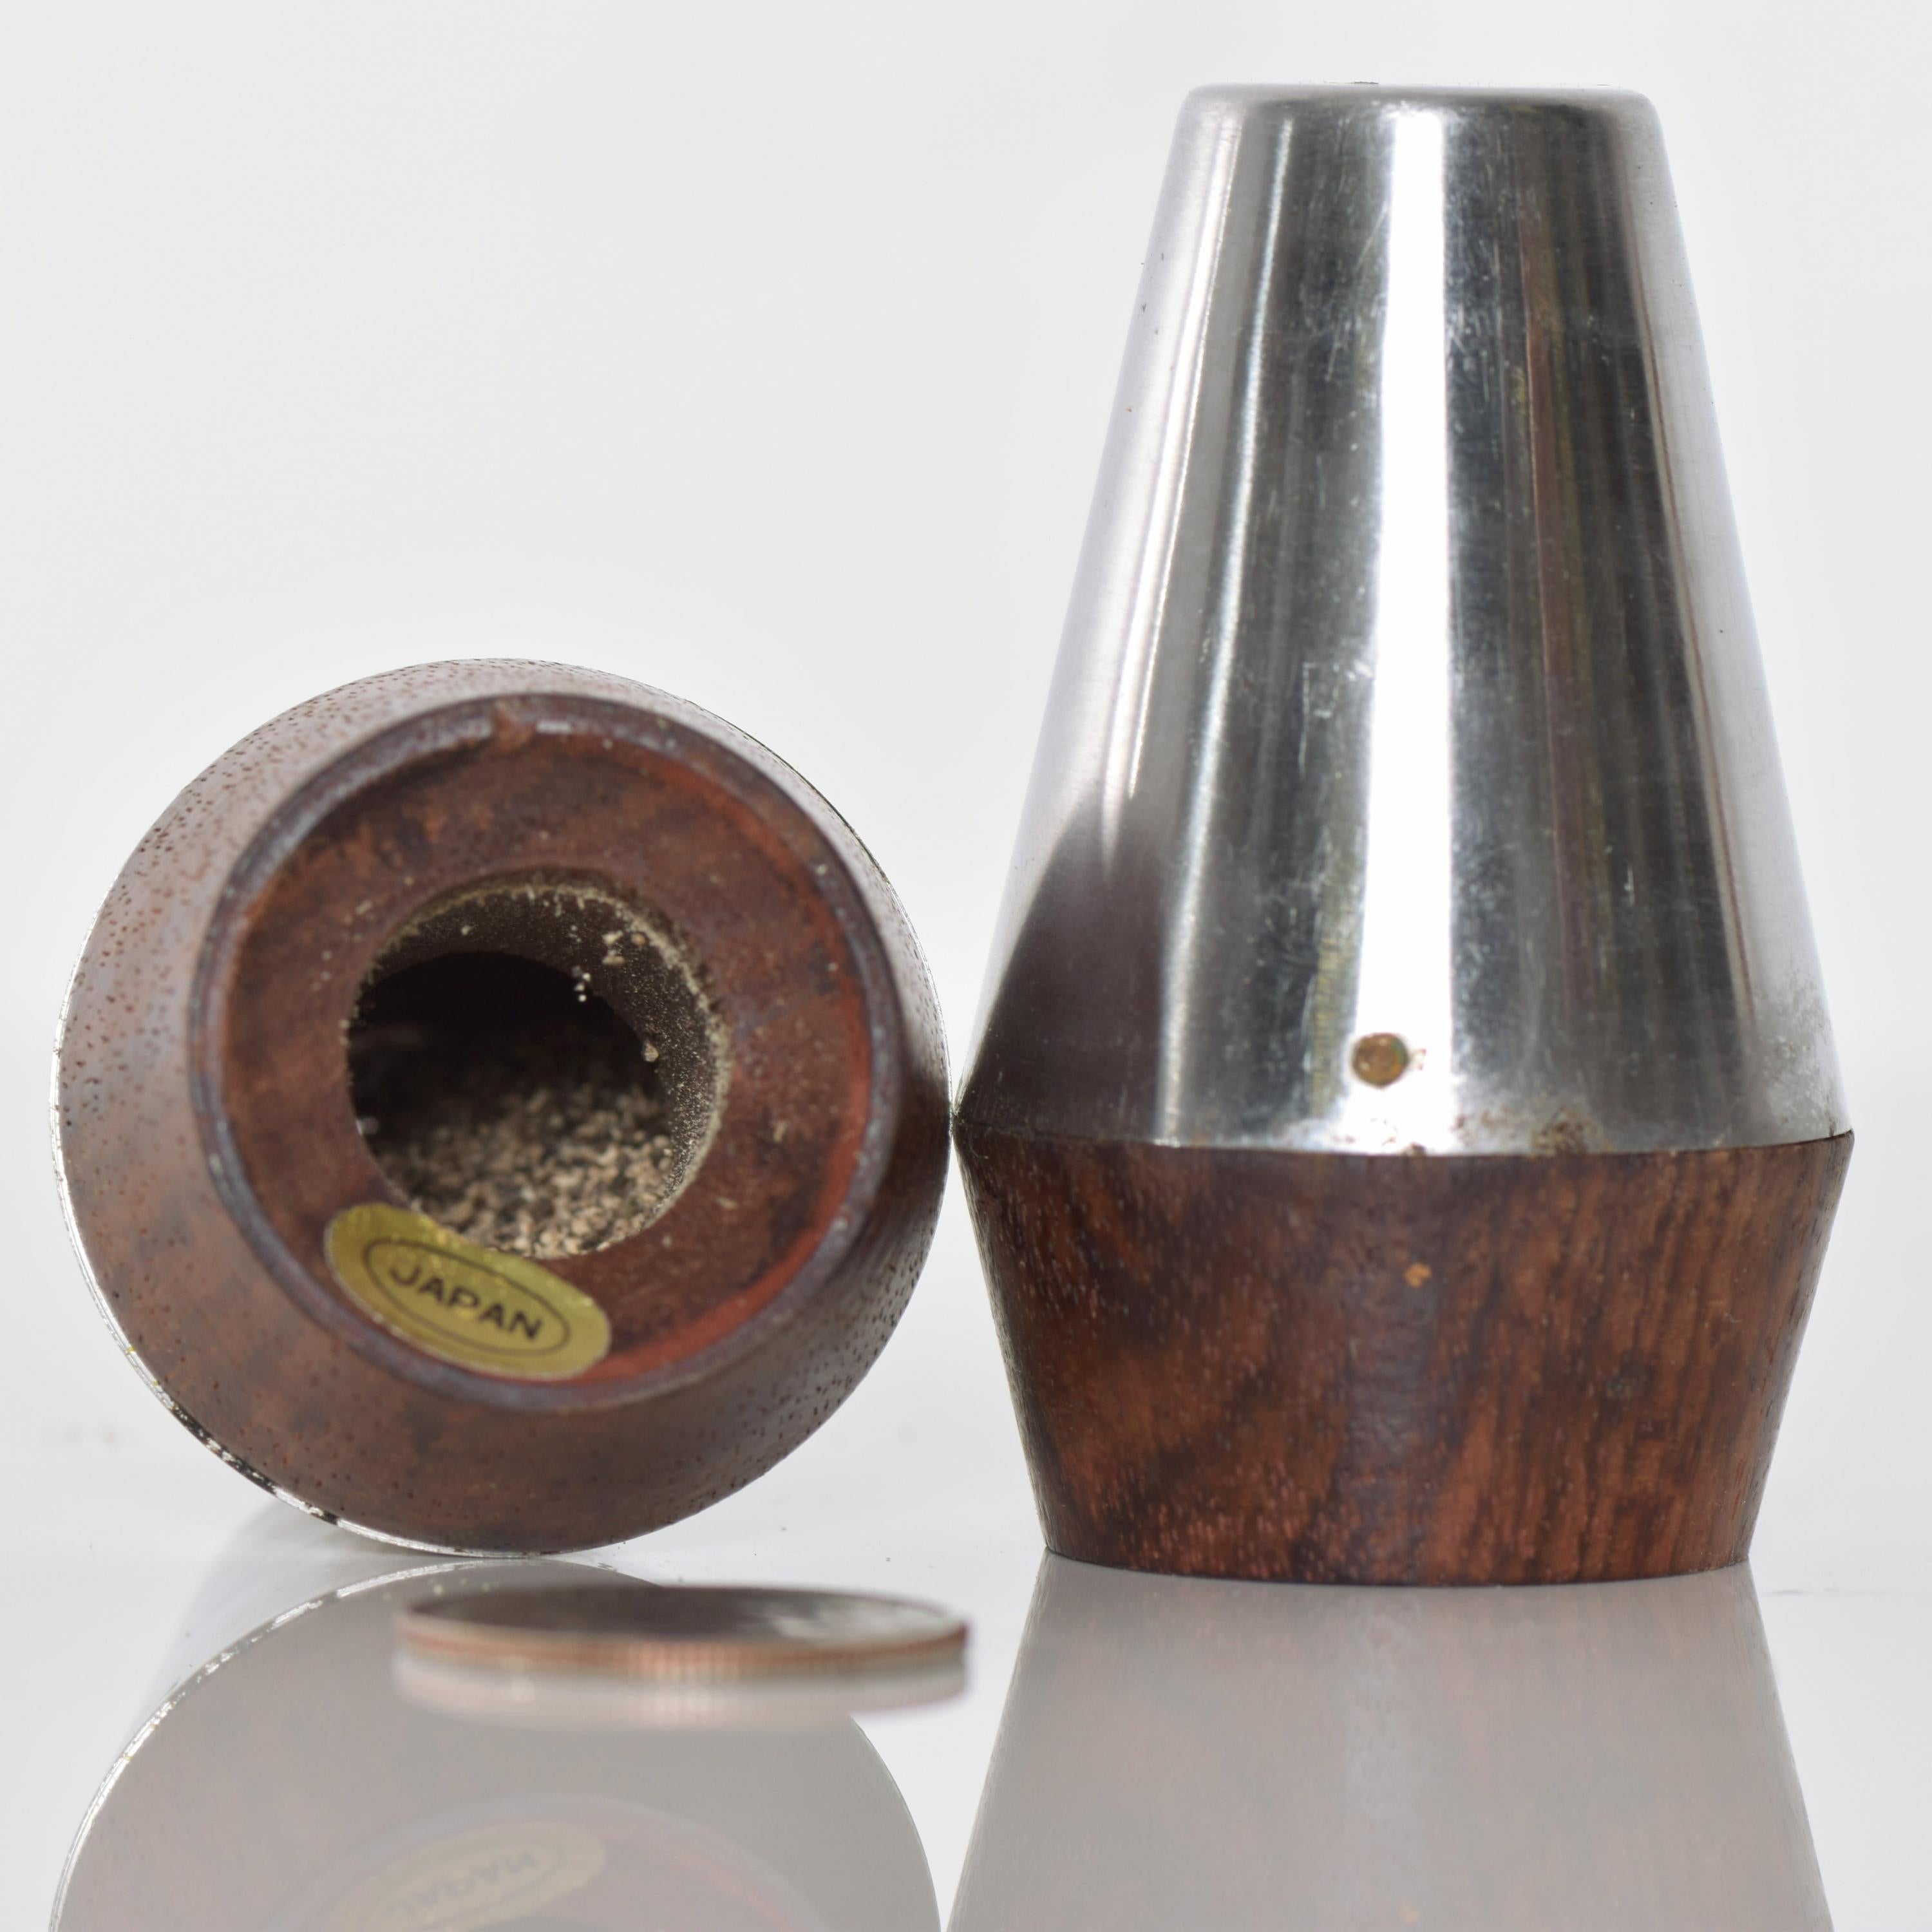 Mid-20th Century  Stainless Steel & Rosewood Salt Pepper Shaker Set 1960s Style of AB Lundtofte